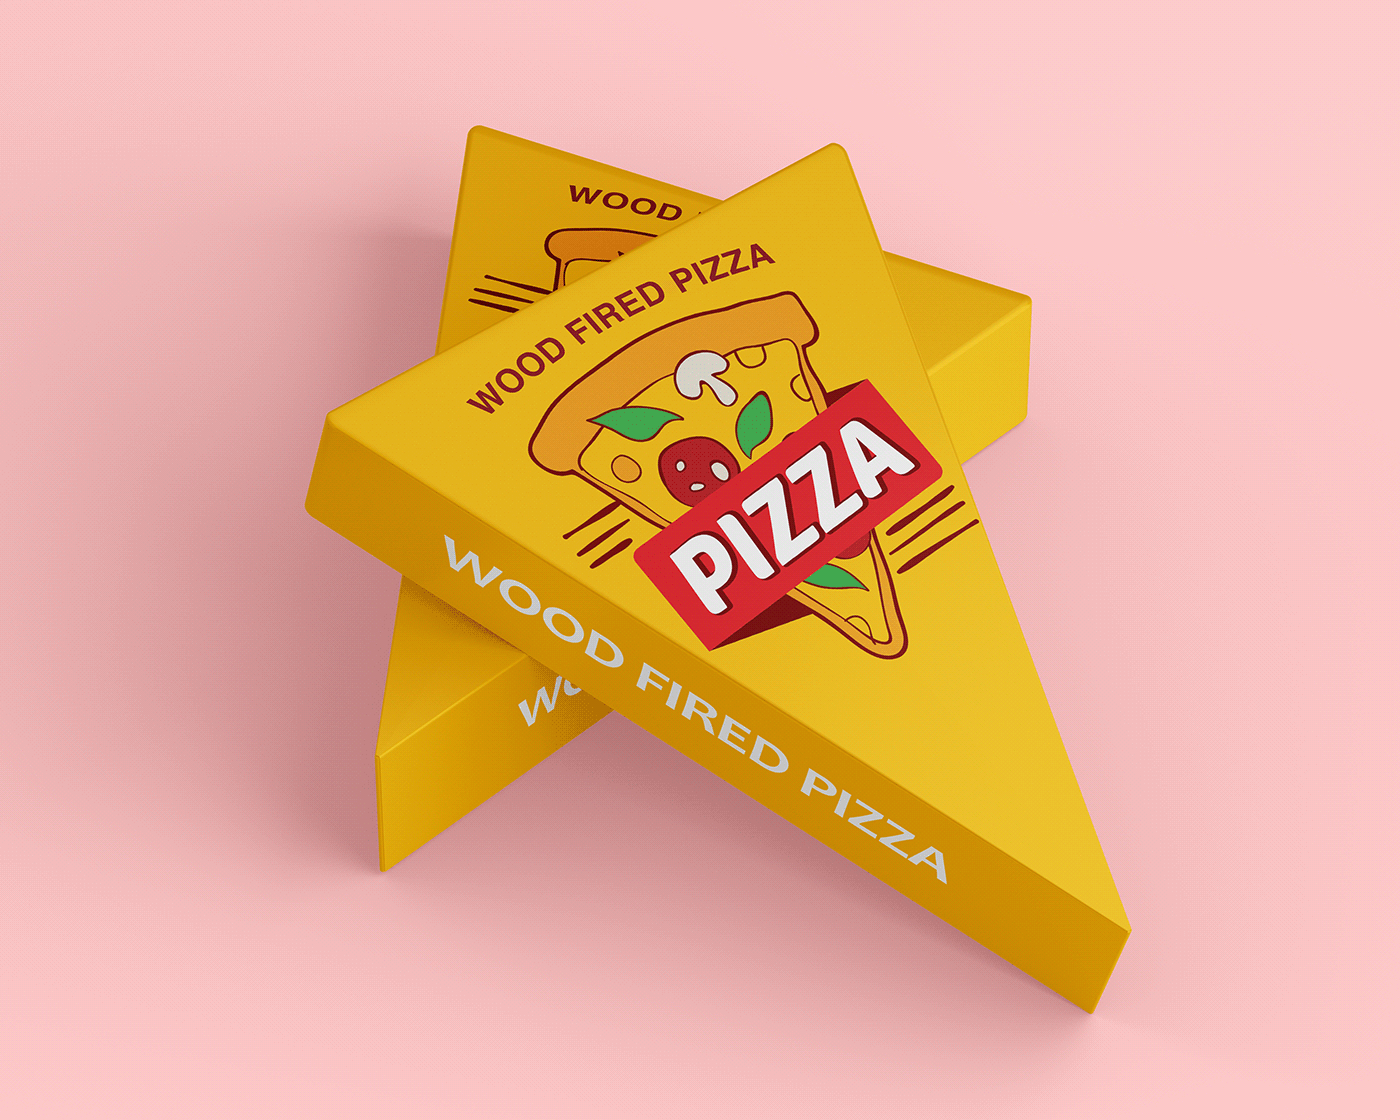 box Fast food package packaging design Pizza pizza box restaurant Wood fired pizza